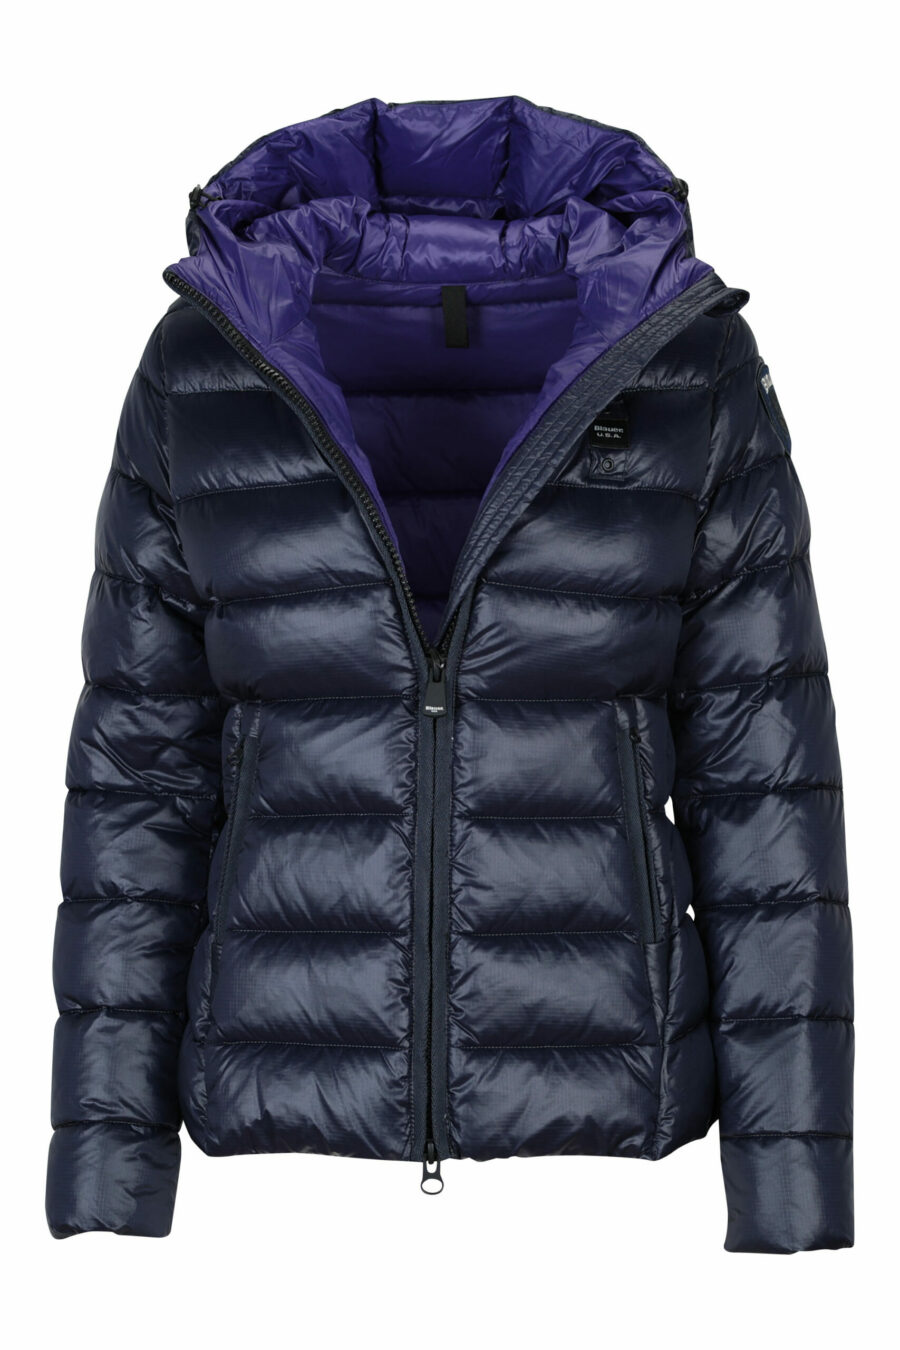 Blue straight lined hooded jacket with violet inside with logo patch - 8058610644932 1 scaled